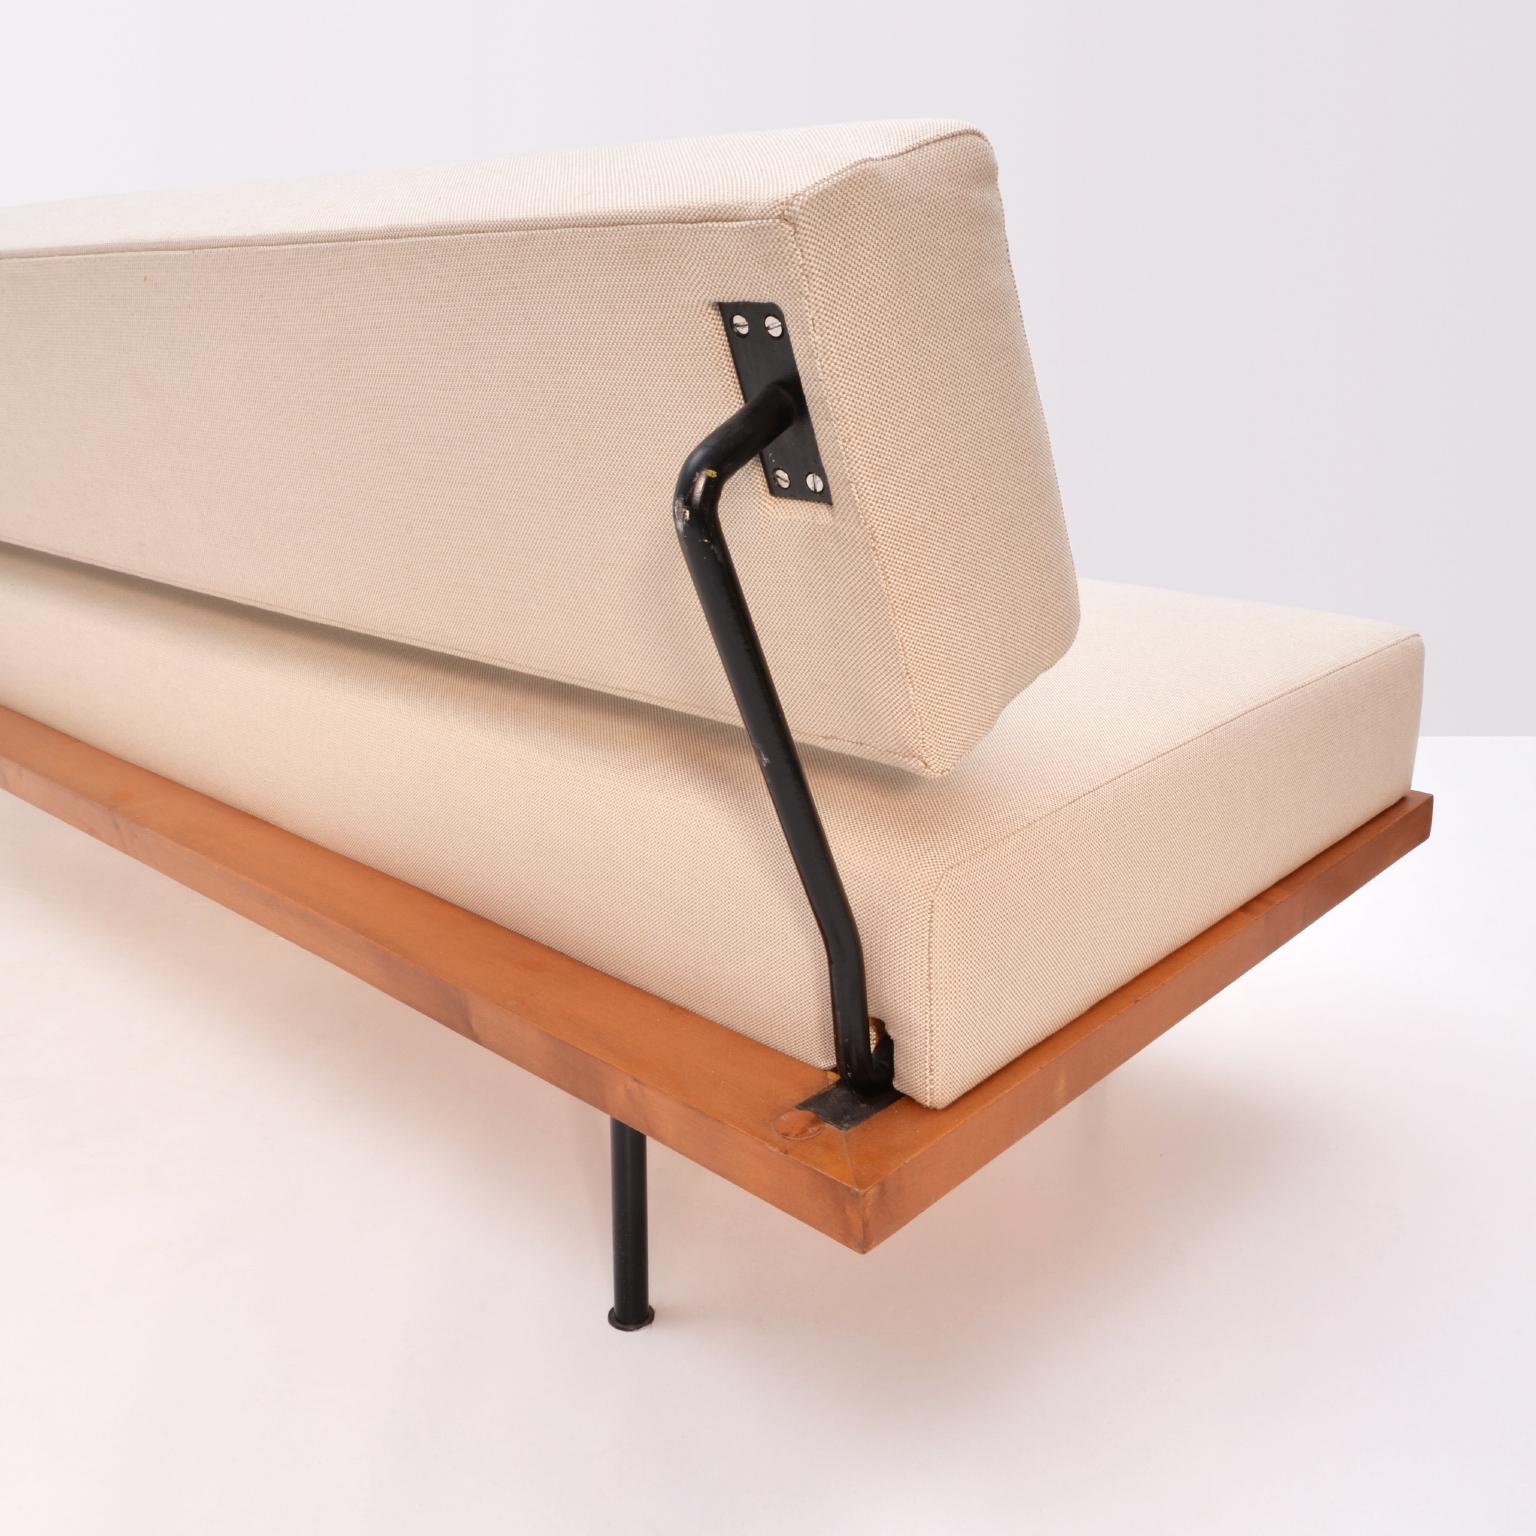 Painted Minimalist Couch/Daybed by Florence Knoll, Wooden Frame, Reupholstered, ca. 1960